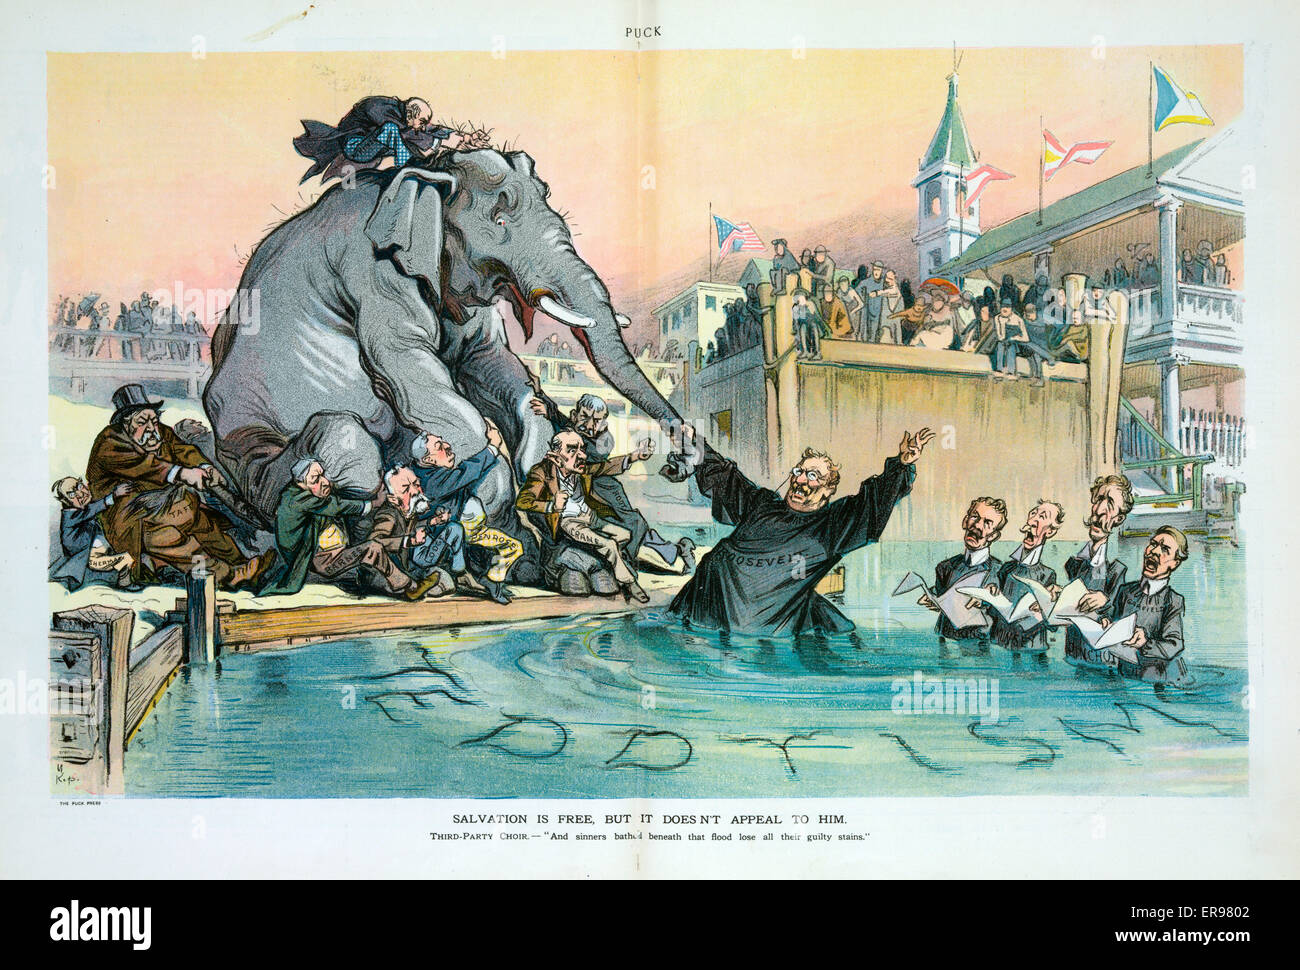 Salvation is free, but it doesn't appeal to him. Illustration shows Theodore Roosevelt, looking somewhat devilish, as a minister standing in a pool labeled Teddyism, attempting to pull the Republican elephant in for an immersion baptism; there is a small Stock Photo